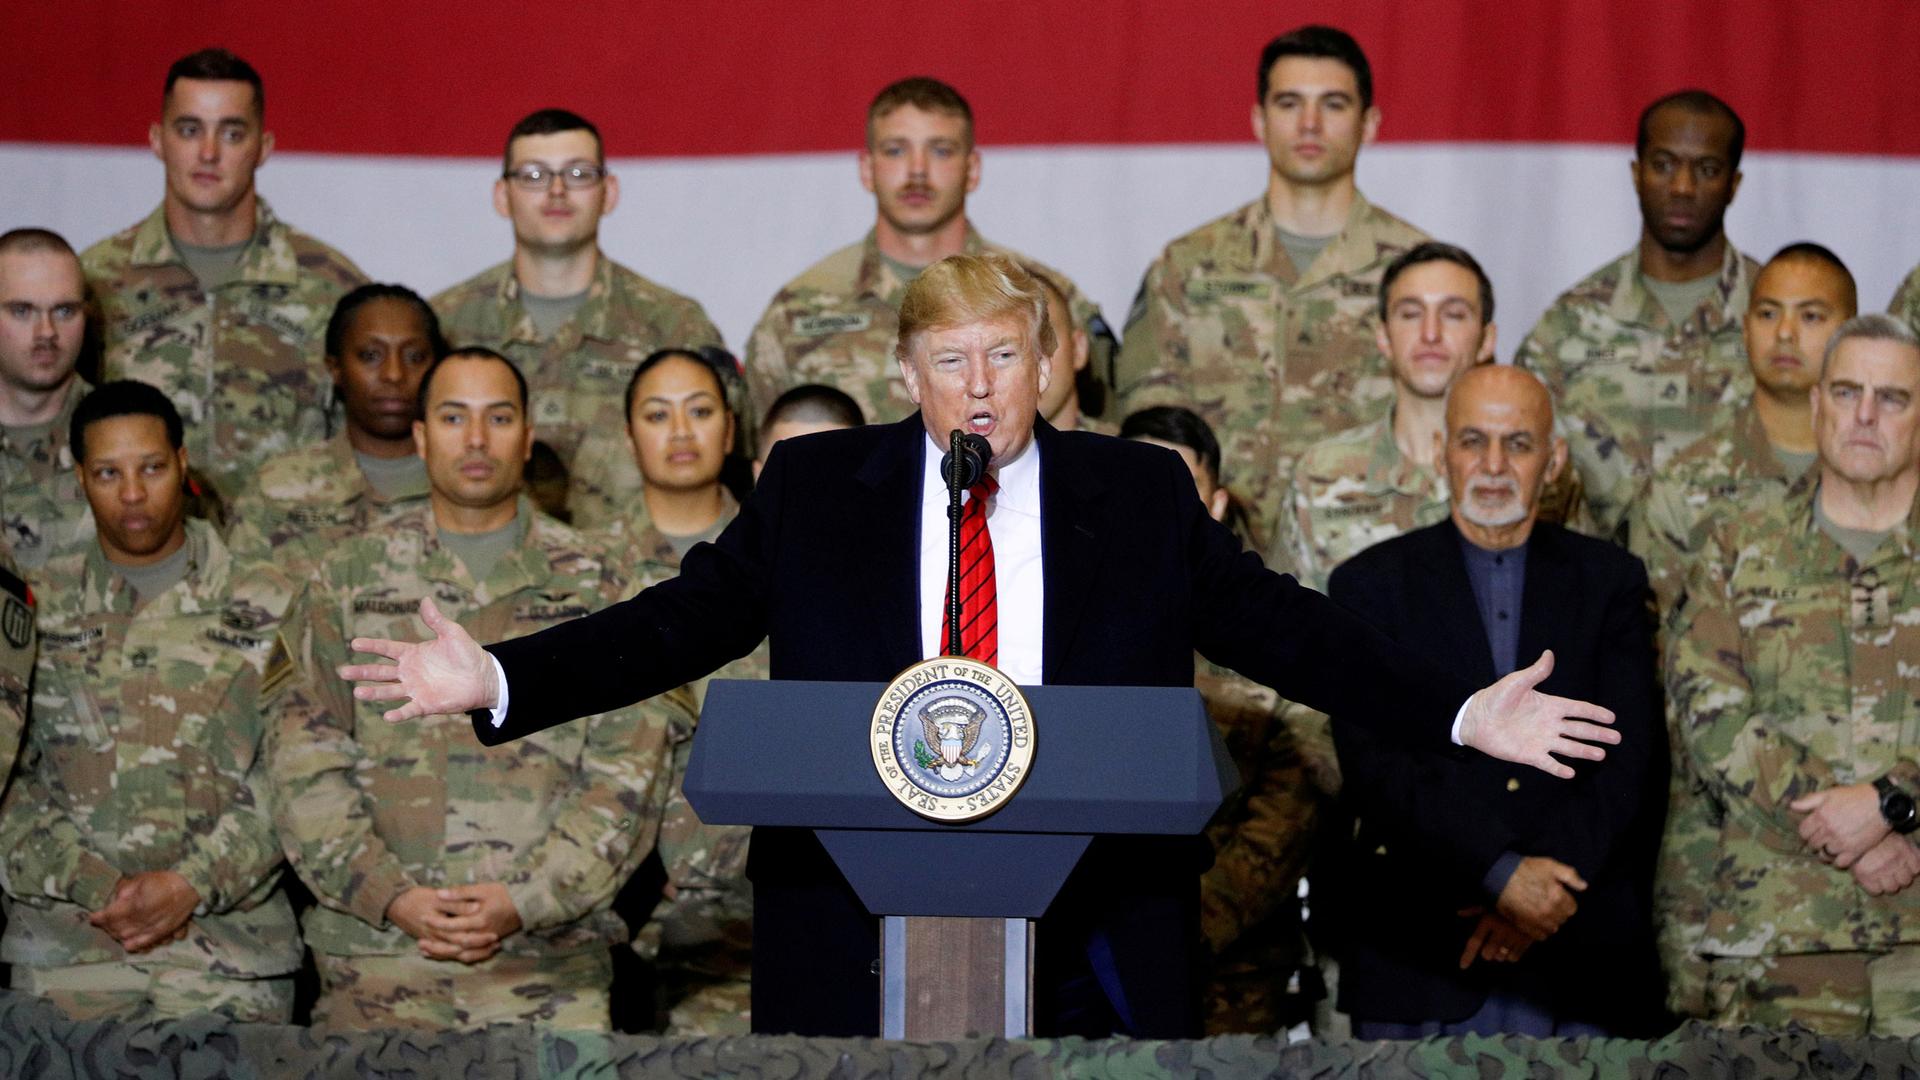 US President Donald Trump is shown standing at a podium with his arms outstretched and rows of US soldiers wearing fatigues standing behind him.